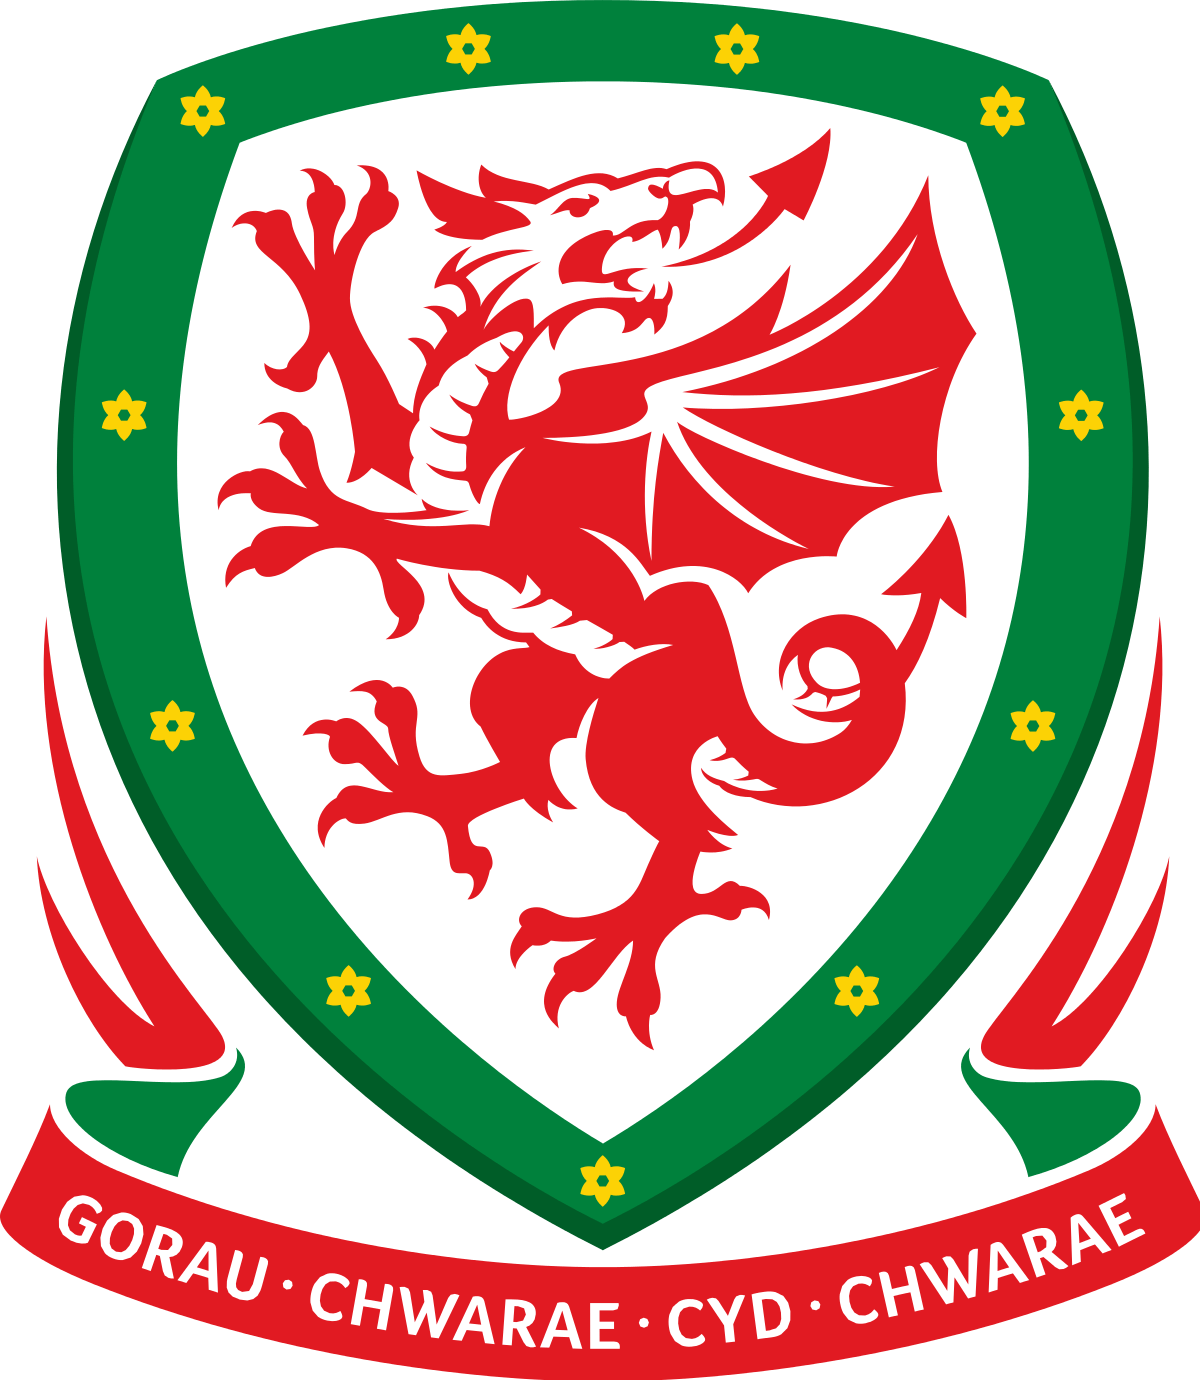 Foreign Soccer Logo - Football Association of Wales